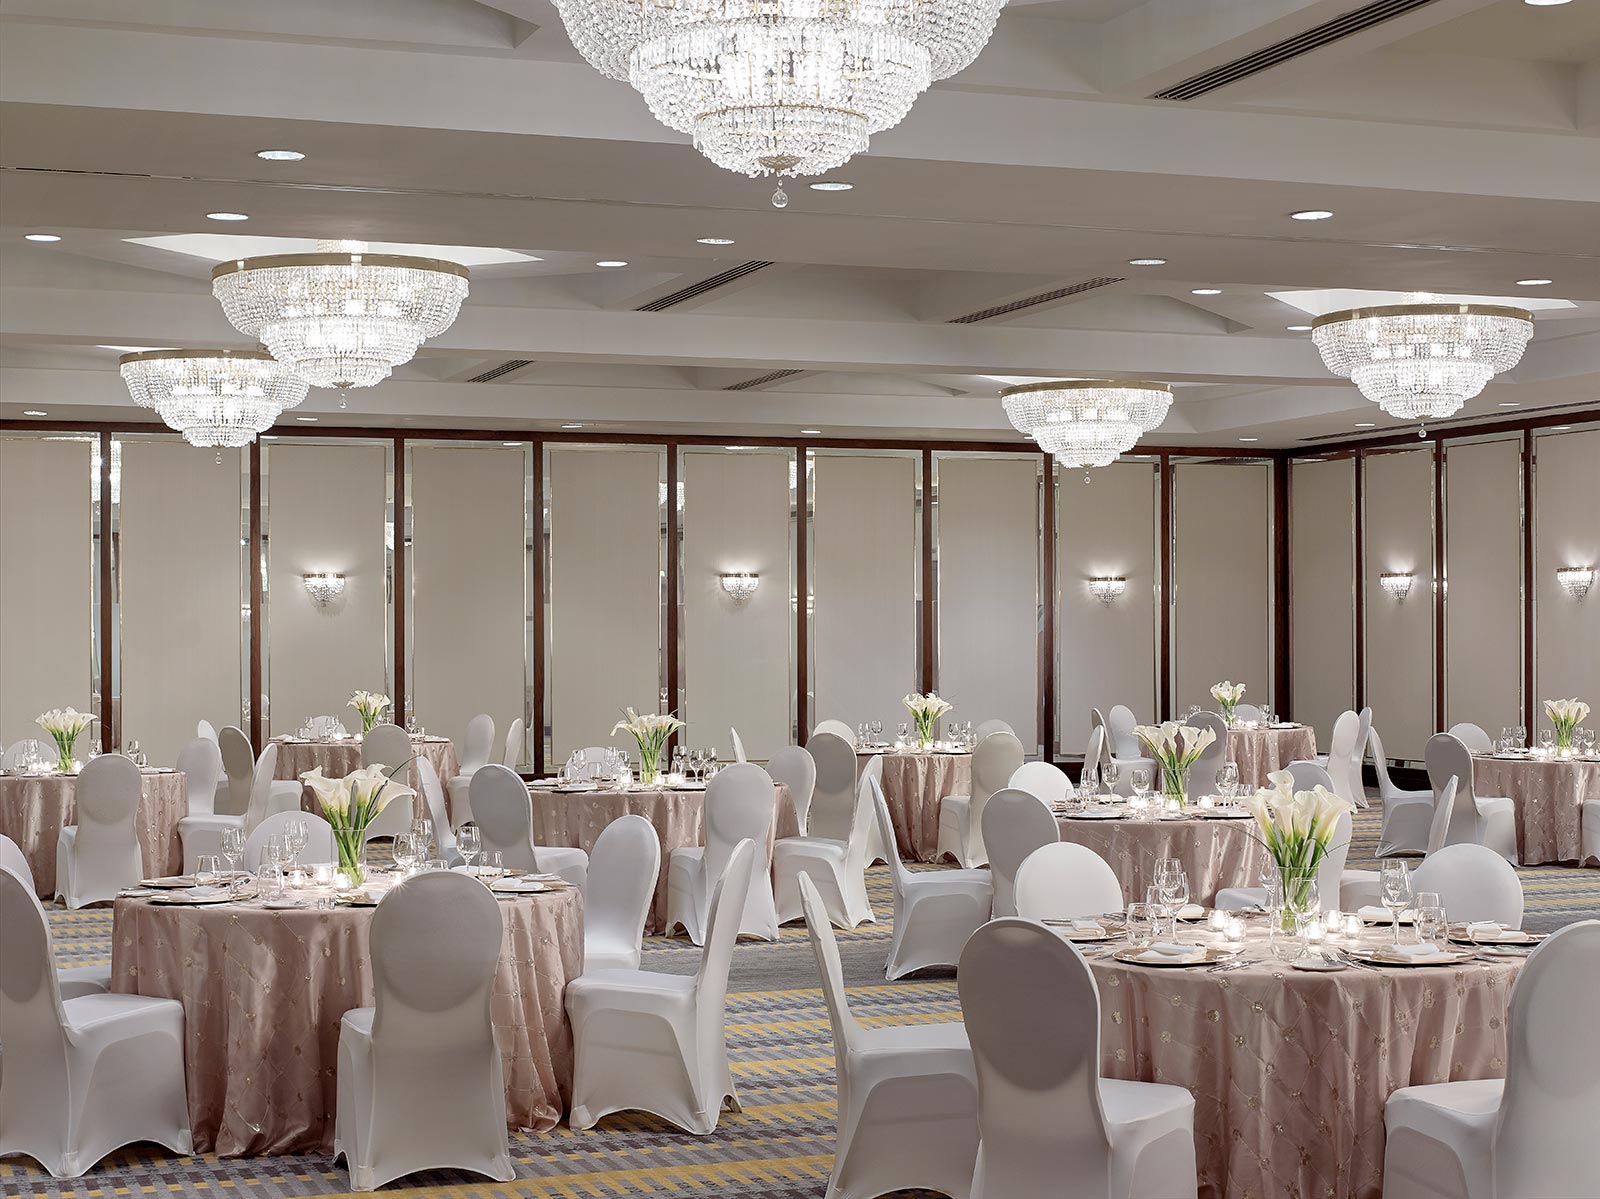 Churchhill Ballroom, Catering Services, Event Spaces And Venues in Chelsea Hotel, Toronto